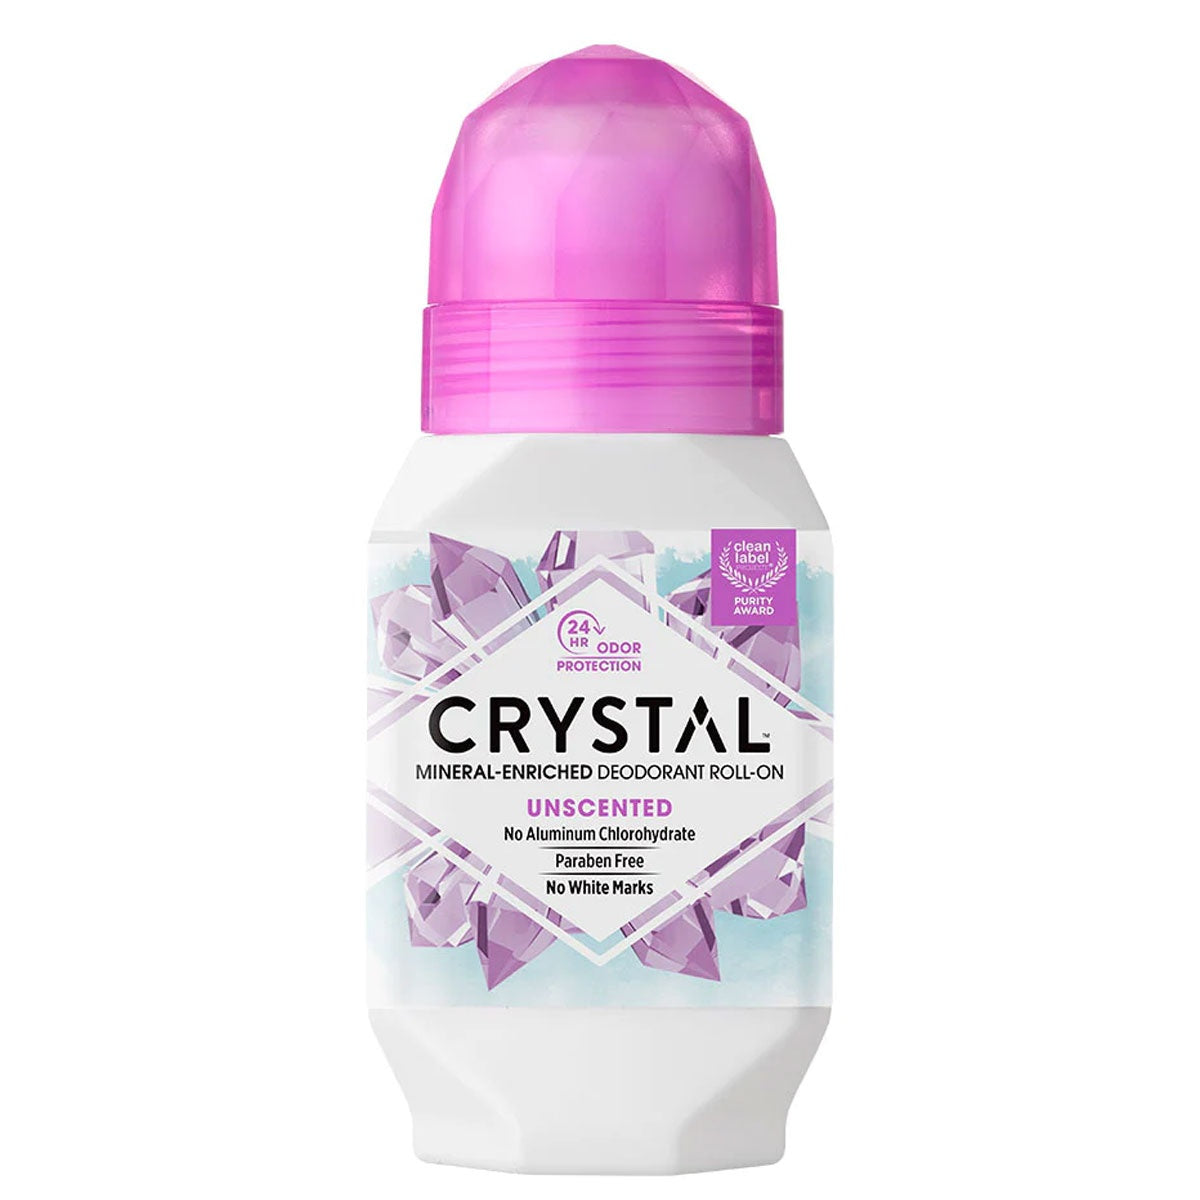 Crystal Roll-on Deodorant Unscented 66ml